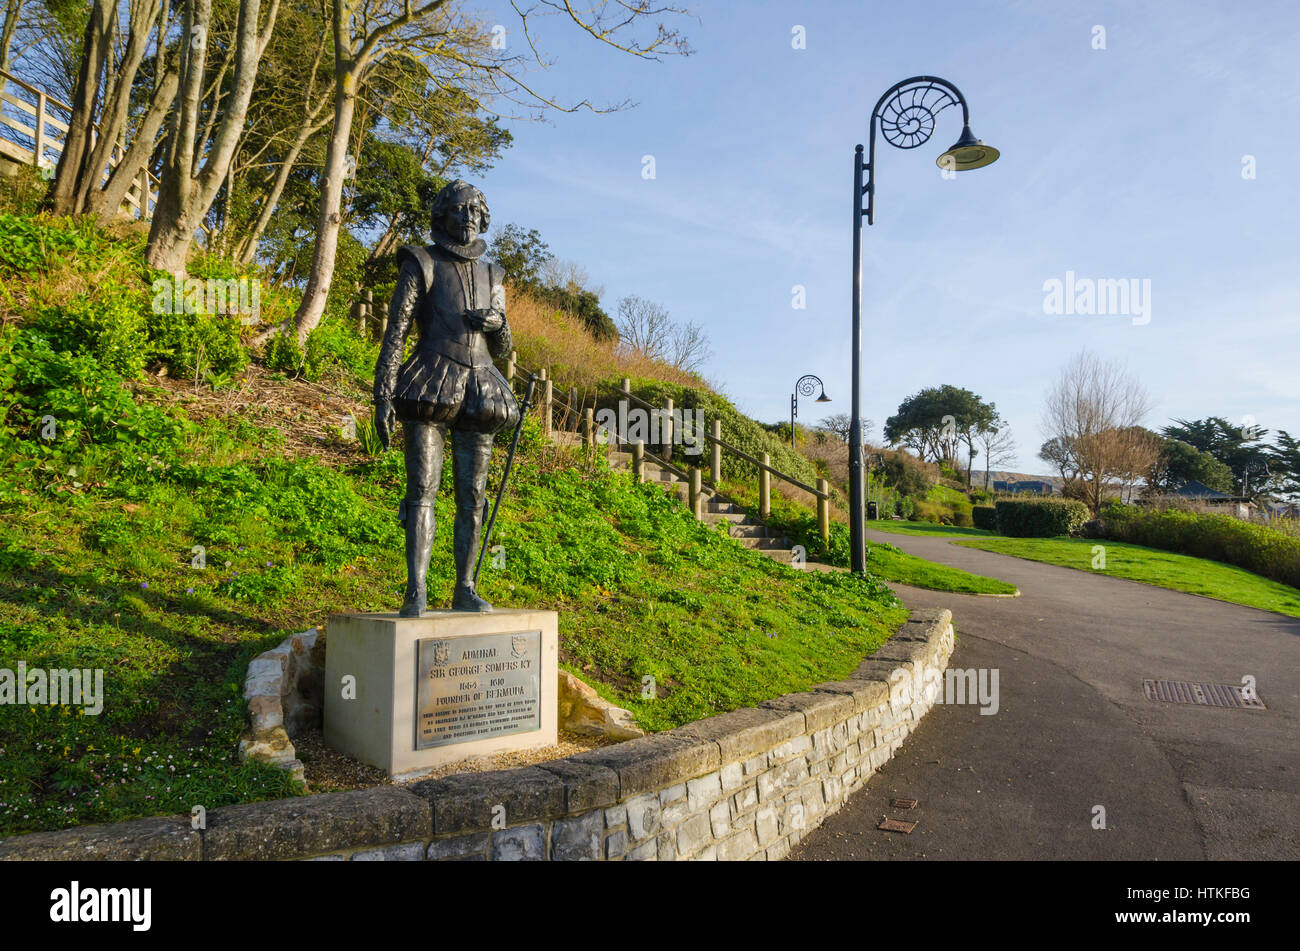 Lyme Regis, Dorset, UK.  13th March 2017.  UK Weather. Beautiful warm spring sunshine and blues skies during the morning at the seaside resort of Lyme Regis on the Dorset Jurassic Coast.  The view is of the statue of Admiral Sir George Sumers located in Langmoor Gardens.  Photo by Graham Hunt/Alamy Live News Stock Photo